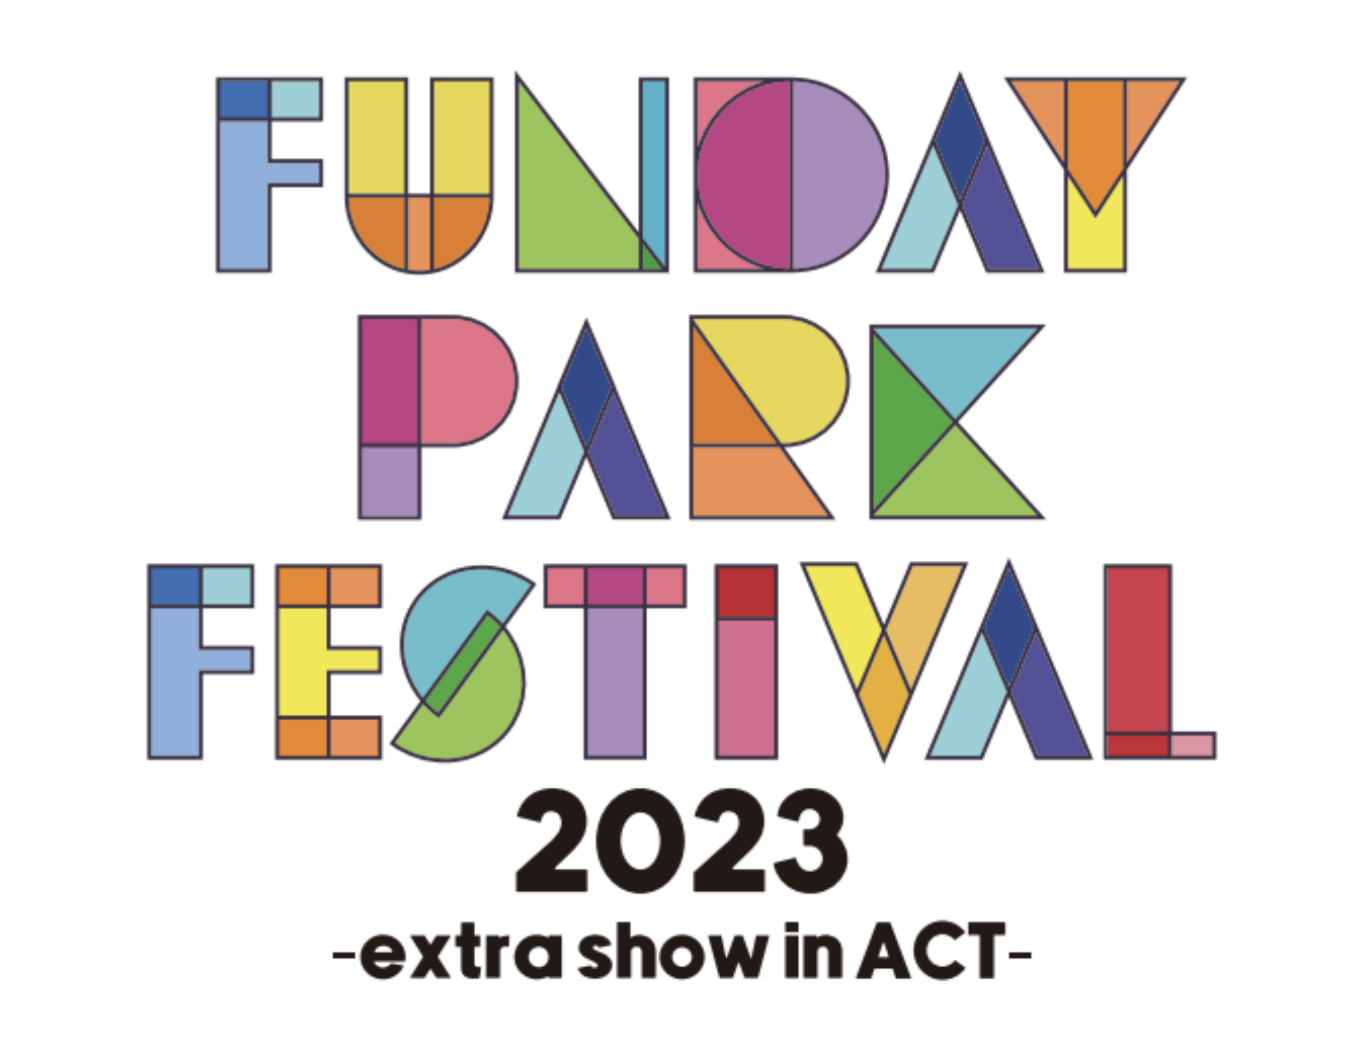 FUNDAY PARK FESTIVAL 2023 -extra show in ACT